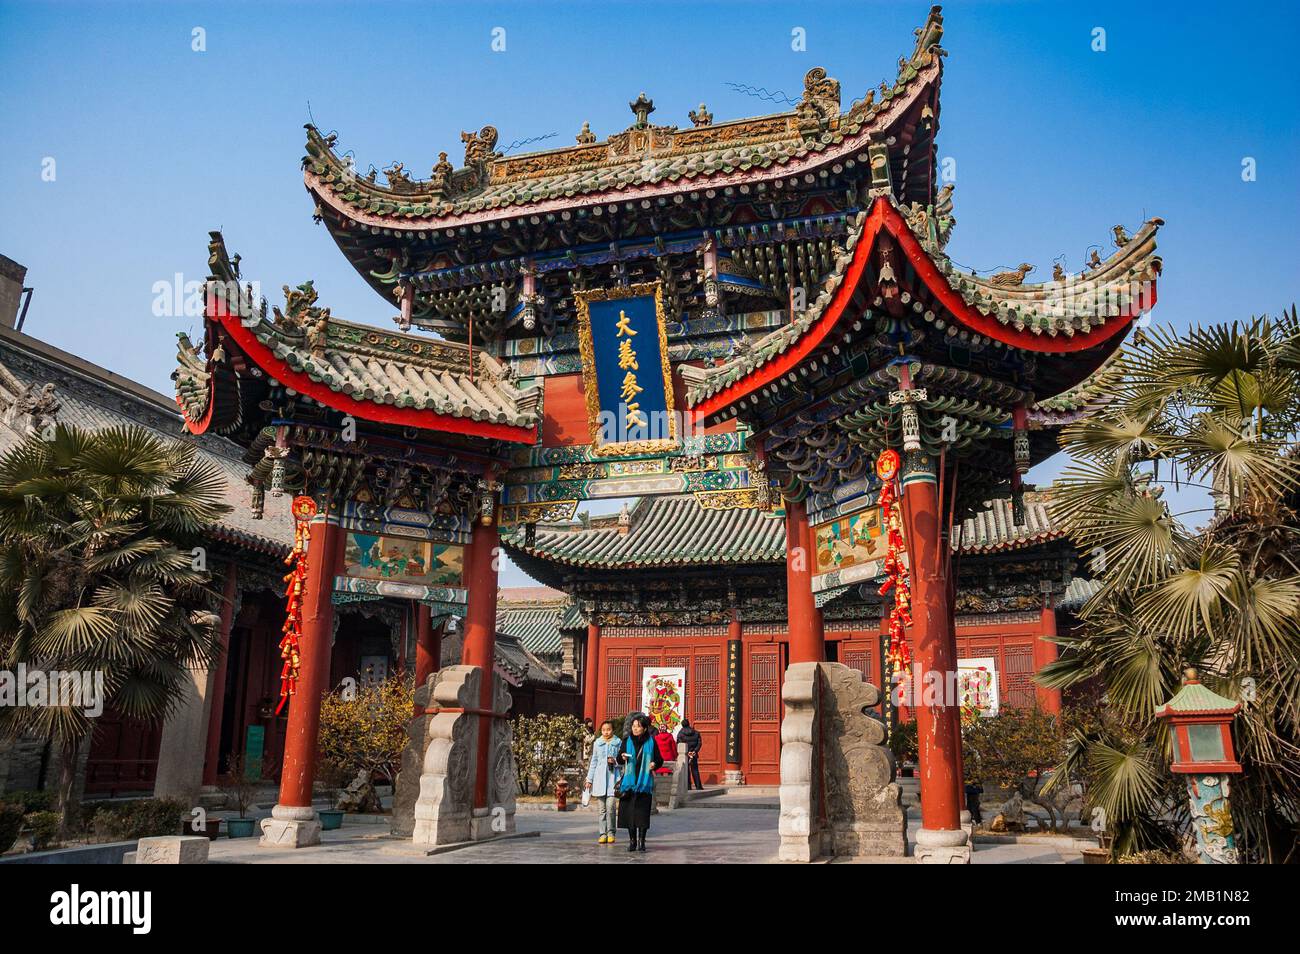 An ornate gateway at the Shanshangan guild hall in Kaifeng. Kaifeng was the capital of the Northern Song Dynasty. Henan Province, China. Stock Photo